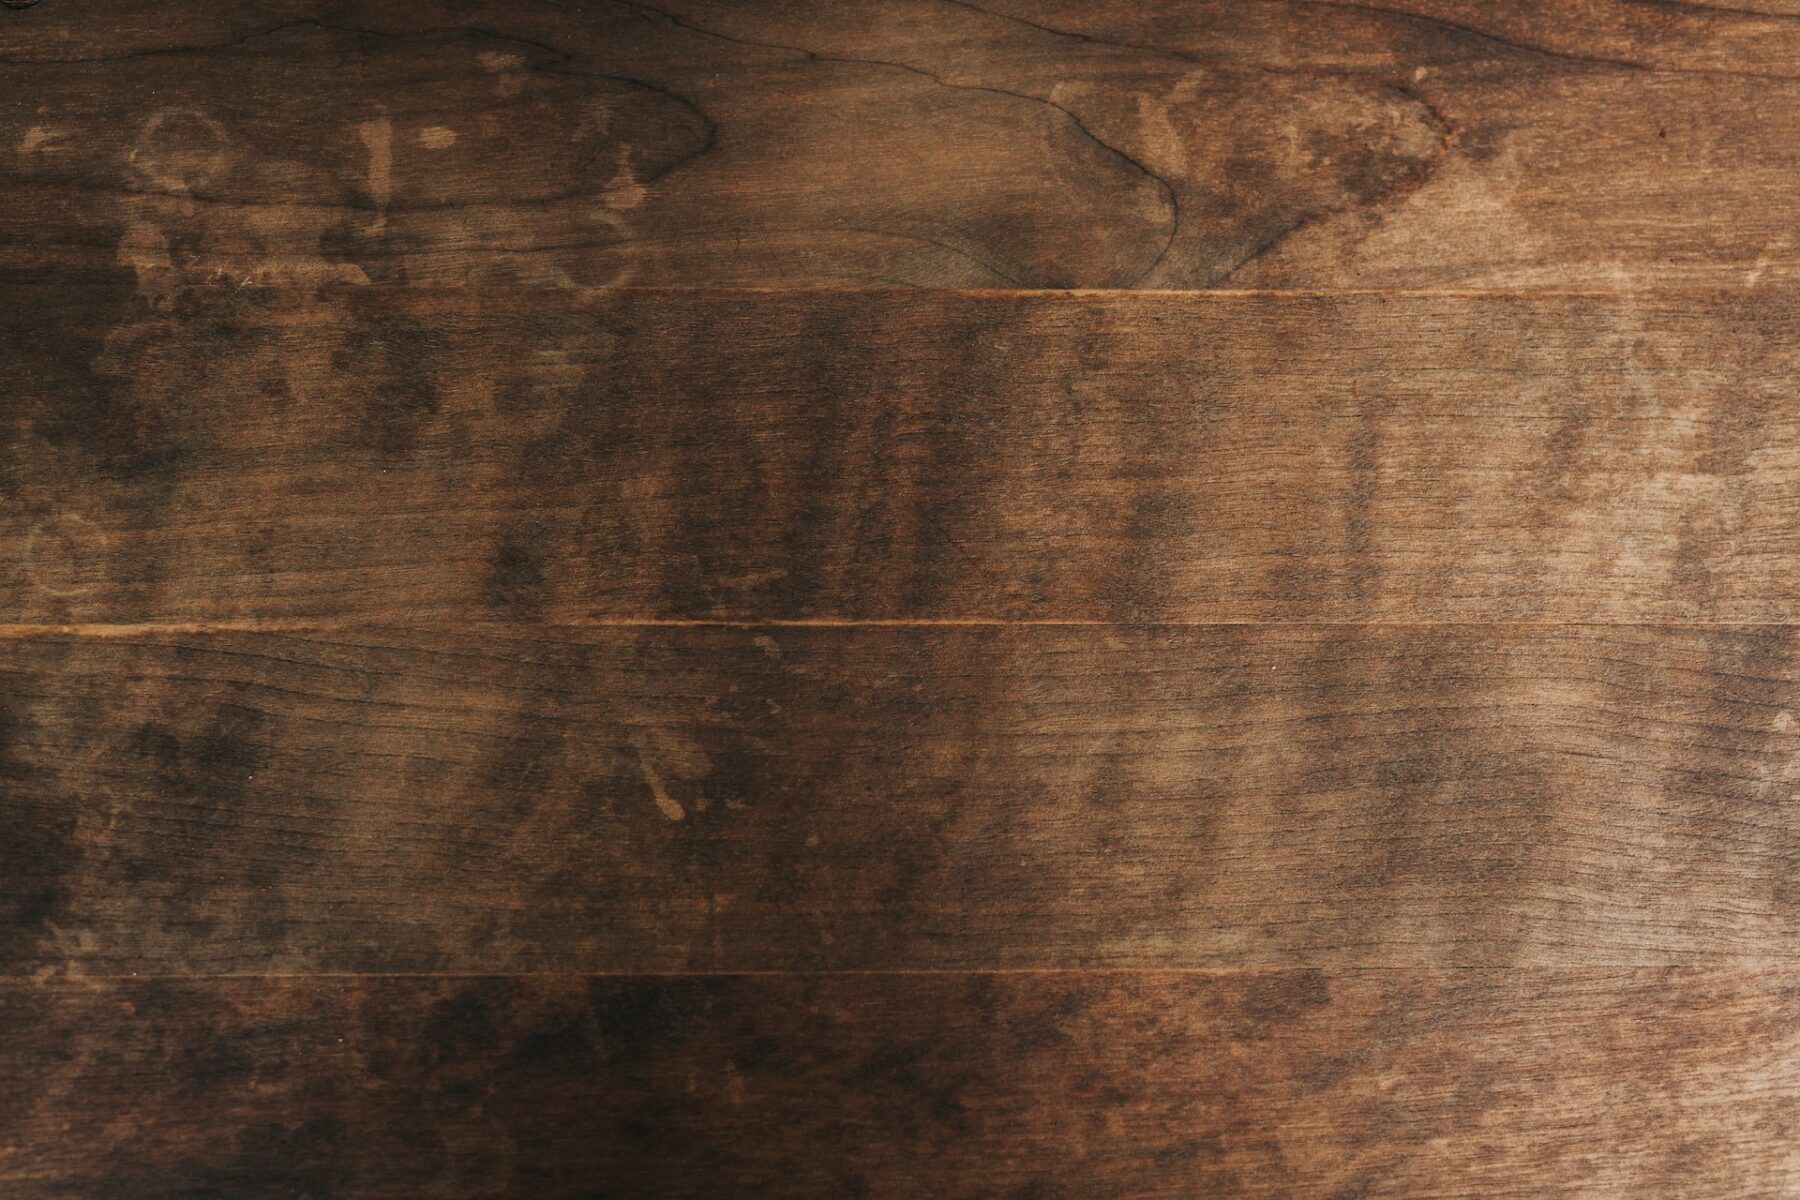 Close-up image of a solid oak floorboard